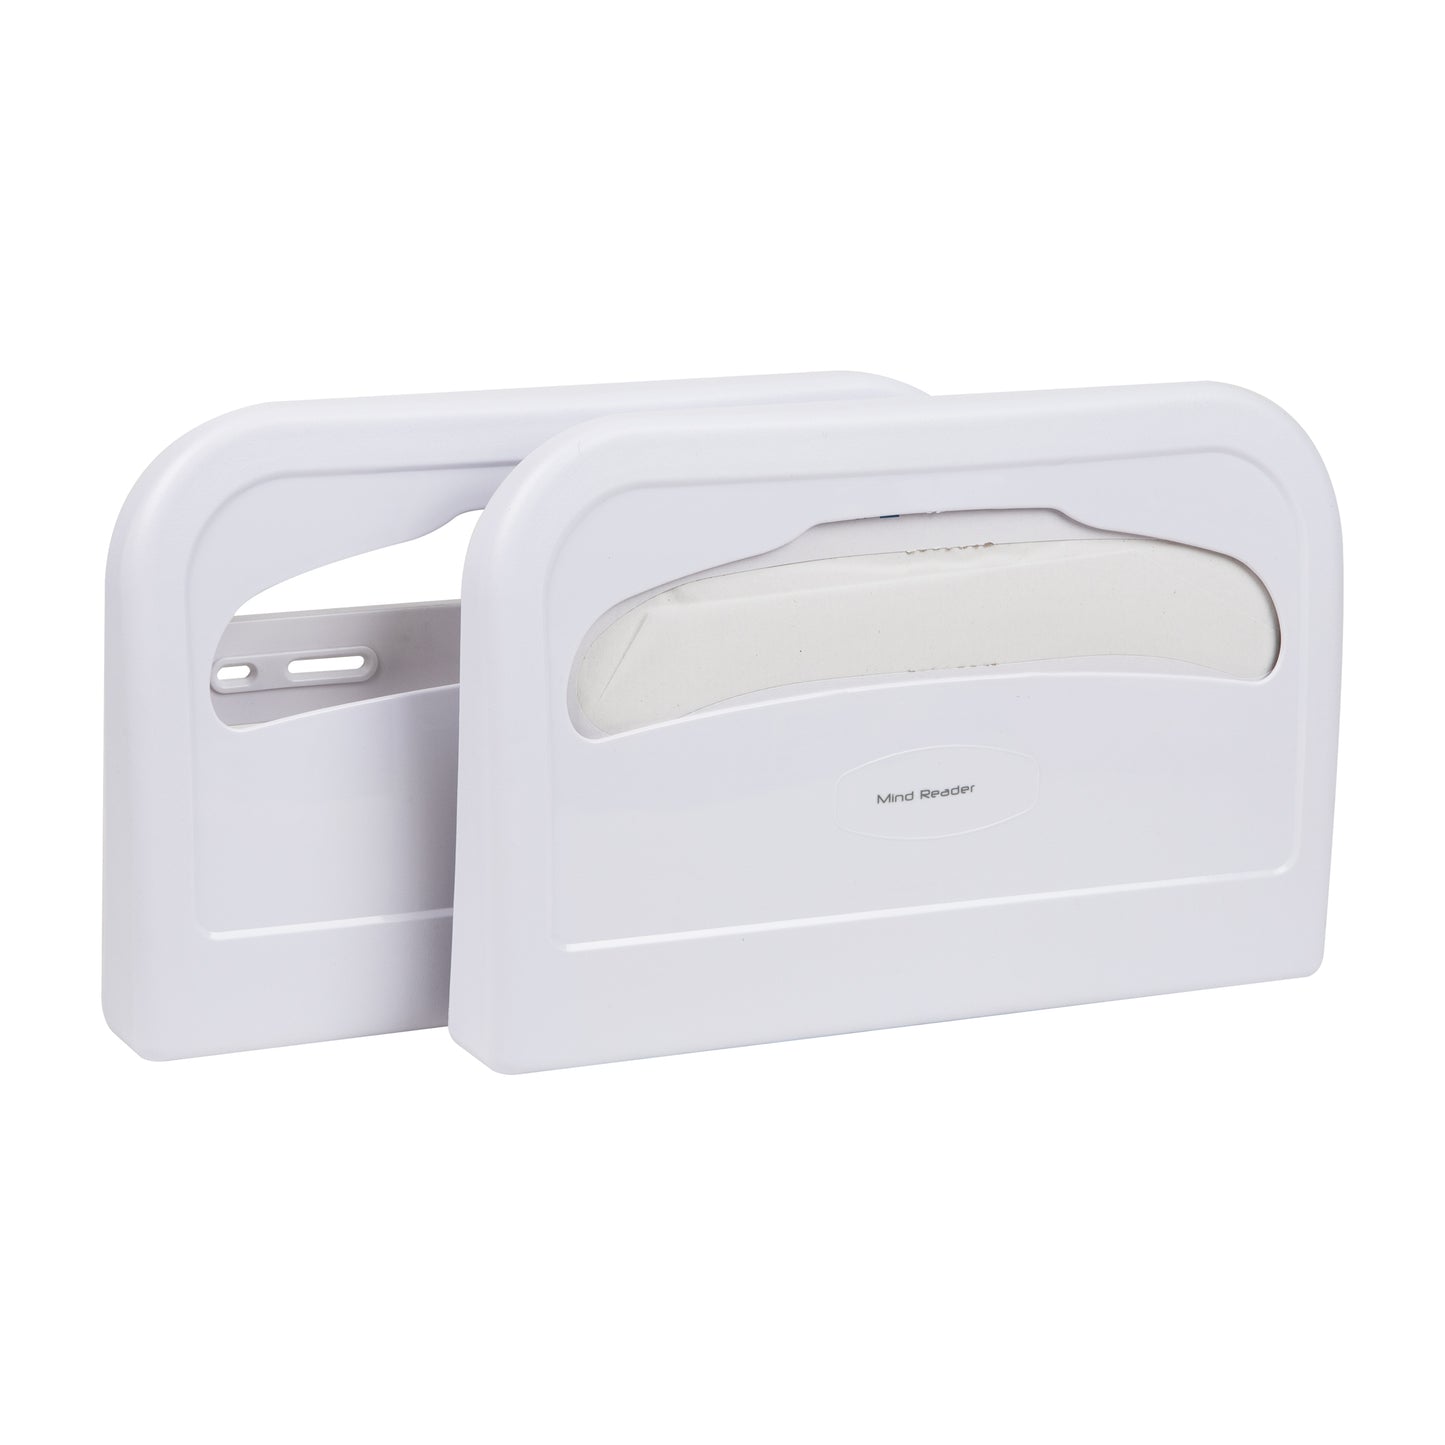 Mind Reader Toilet Cover Dispenser, Disposable Paper Set Protectors, Wall Mounted, Restroom, Set of 2, 16.5"L x 11.25"W x 2"H, White